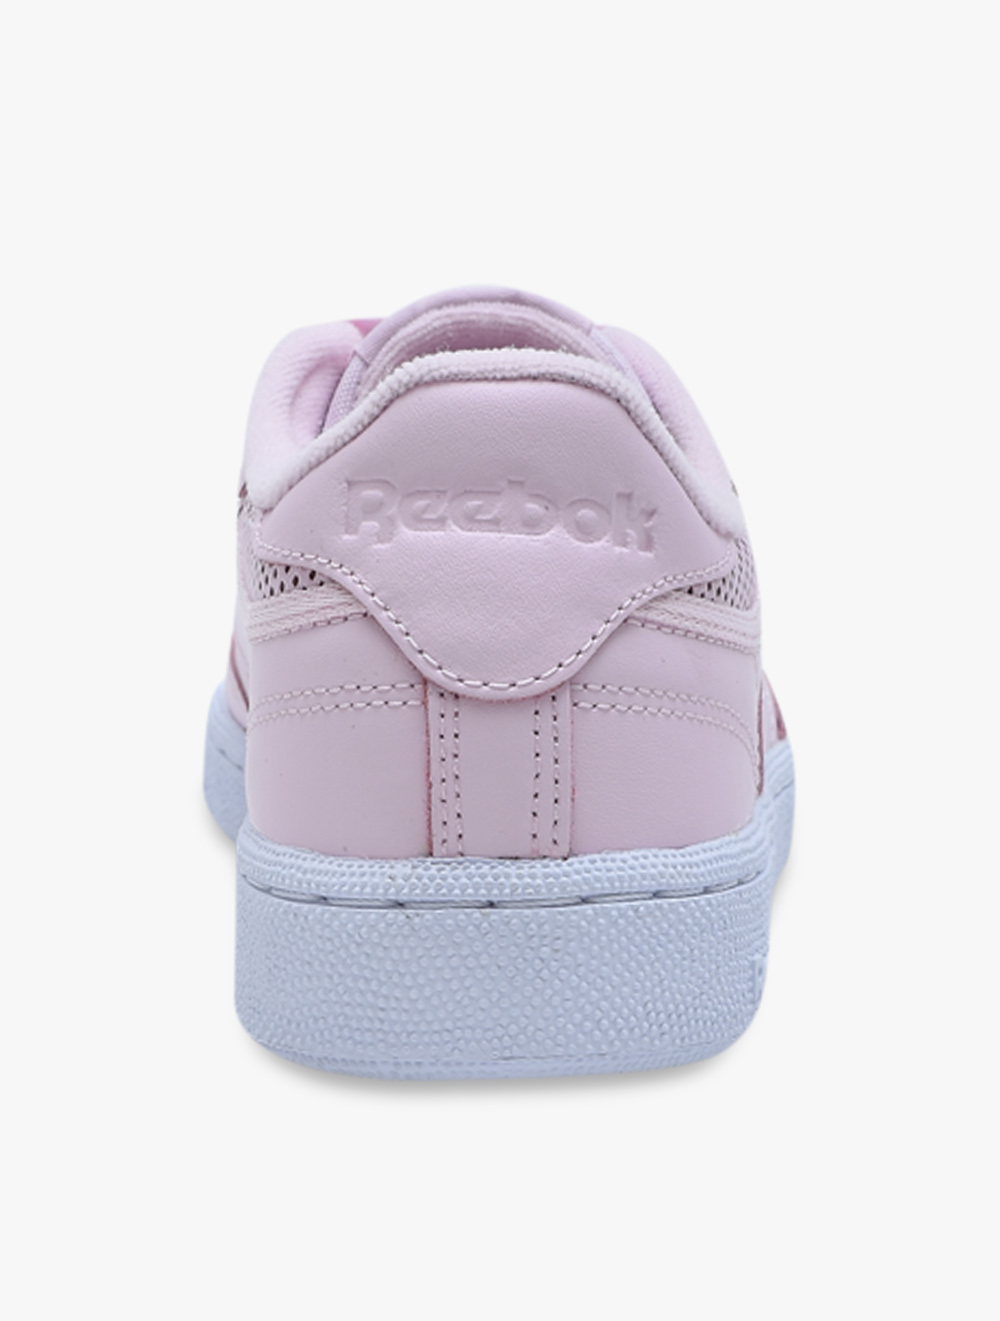 all baby pink reebok